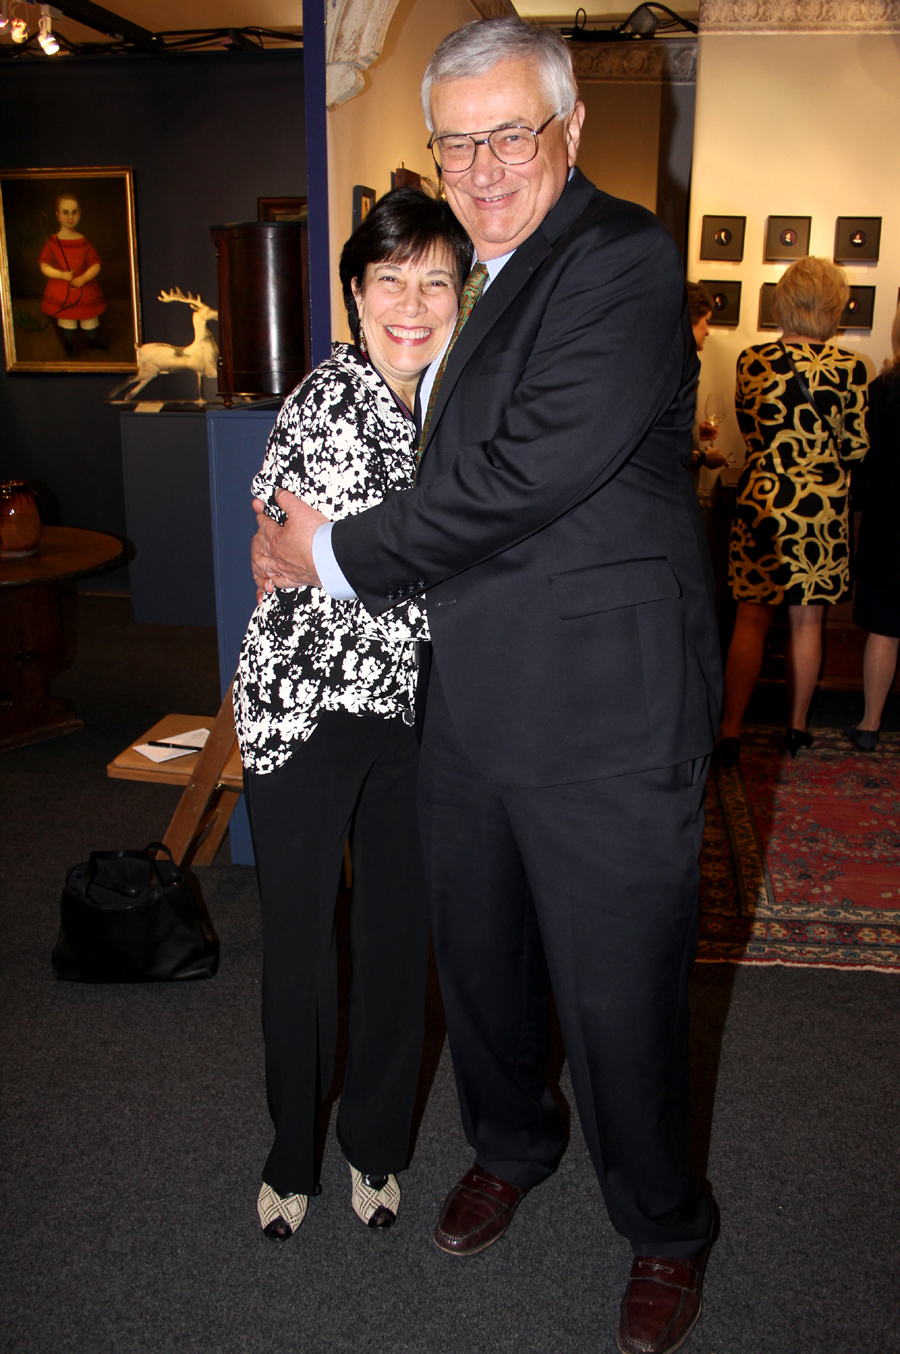 Sally Herrup of Sheffield, Mass., gets a hug from New Hampshire<br>auctioneer Ron Bourgeault, her former employer.